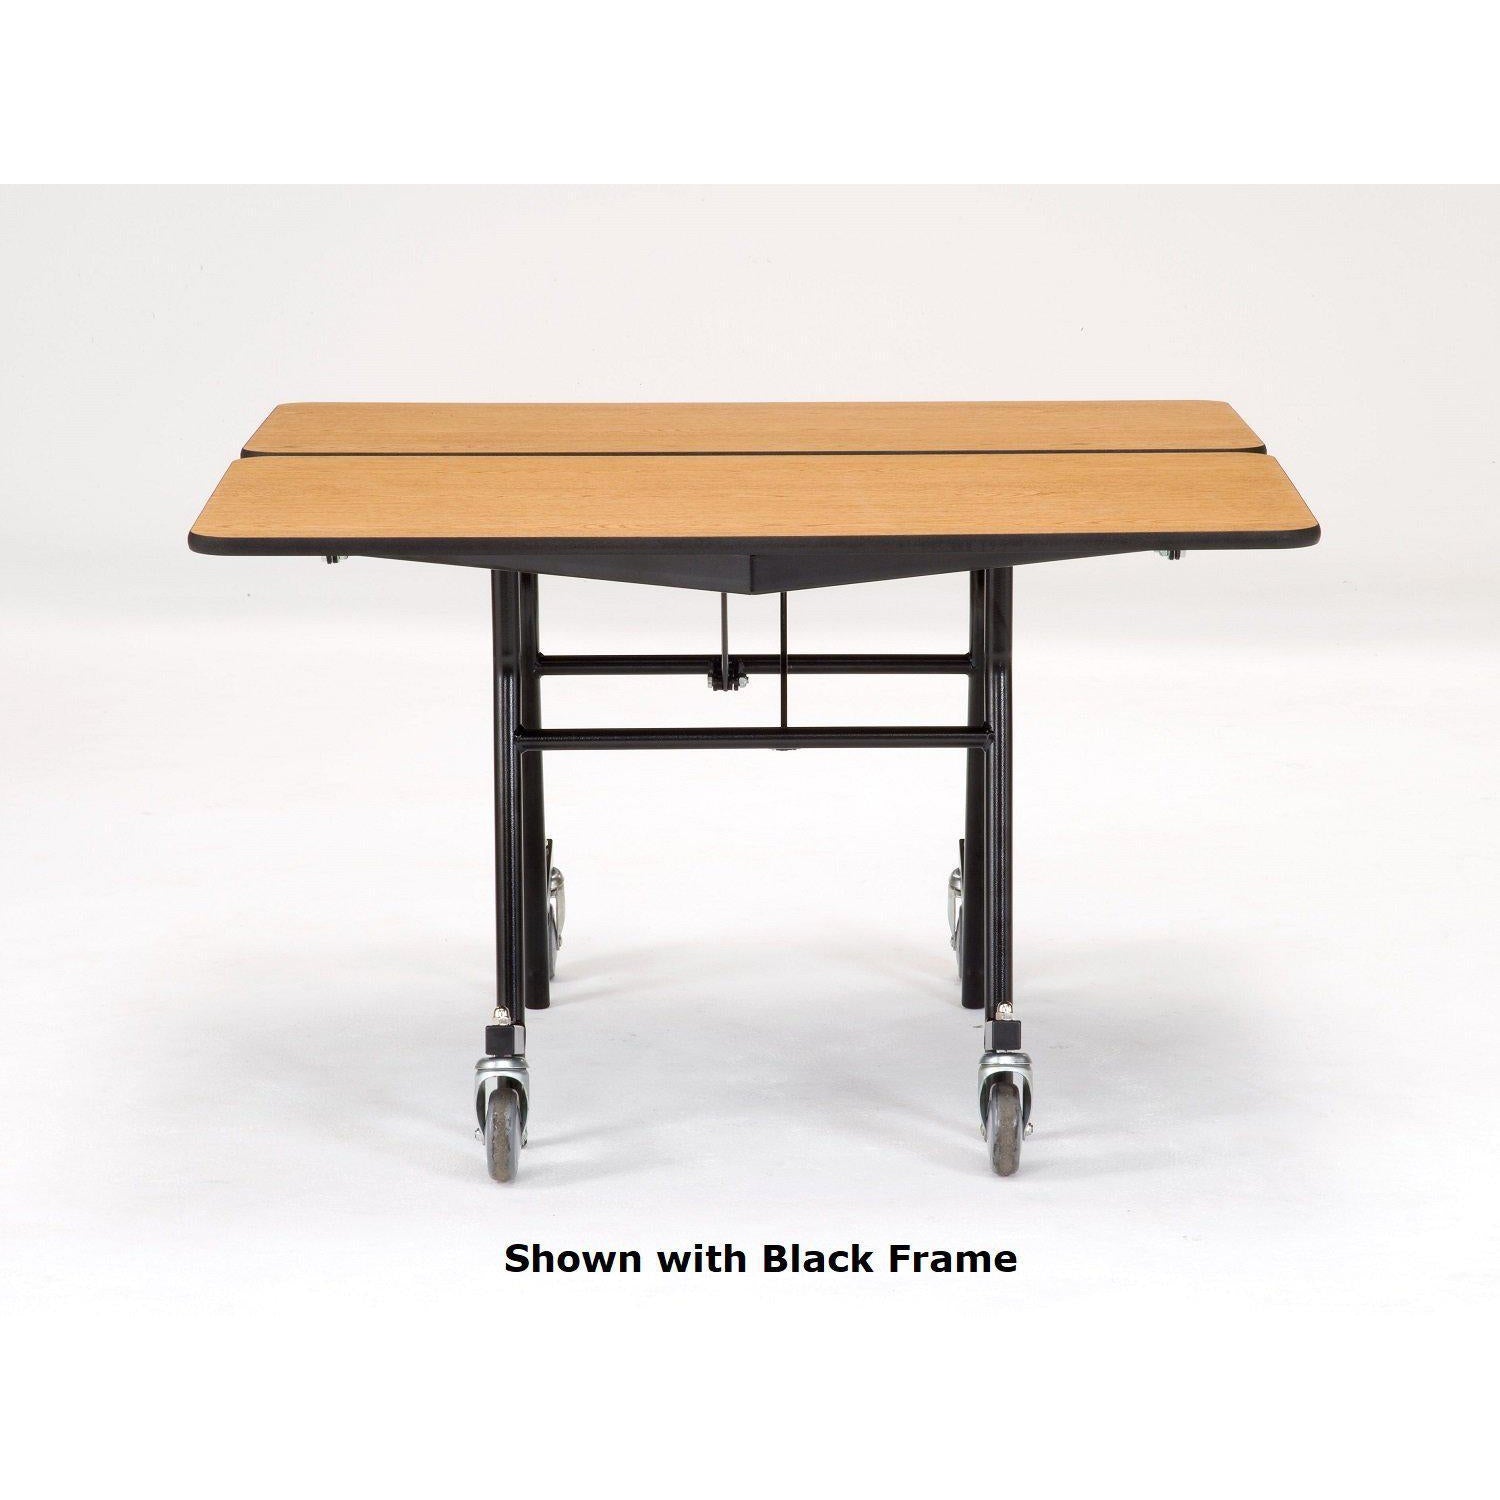 Mobile Shape Cafeteria Table, 48" Square, Particleboard Core, Vinyl T-Mold Edge, Chrome Frame